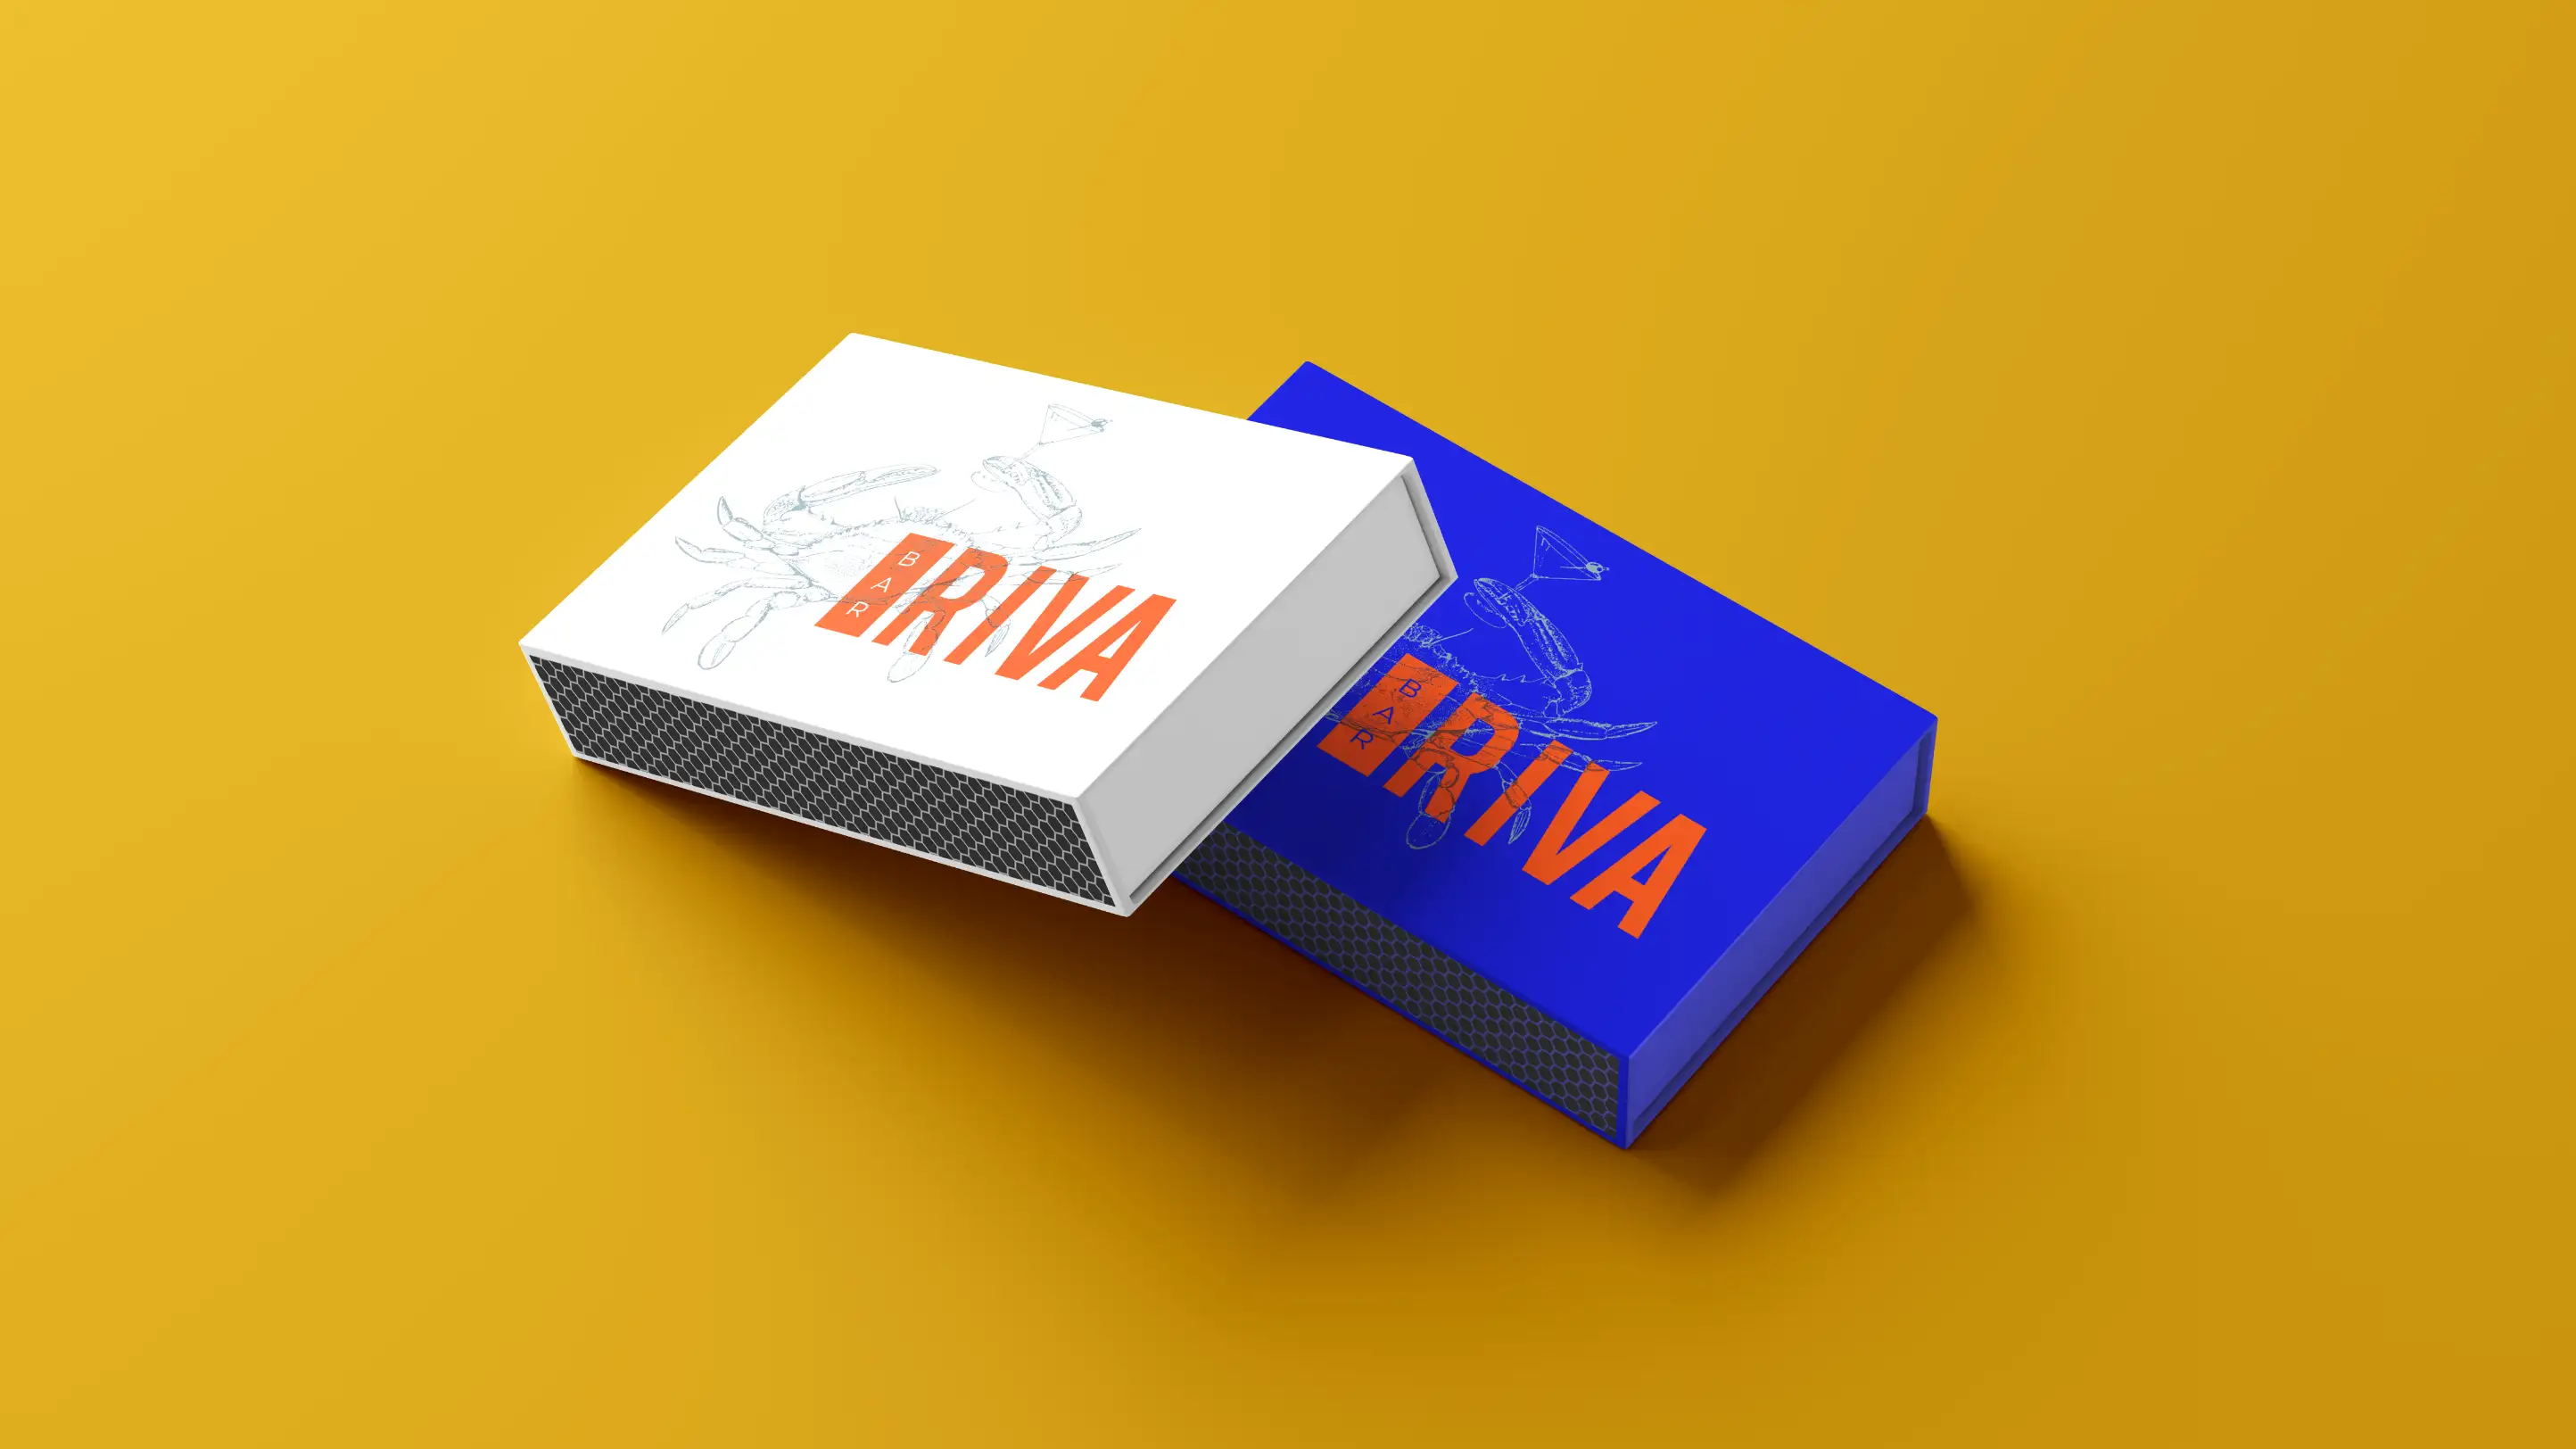 Blue and white Bar Riva matchbooks on yellow background.